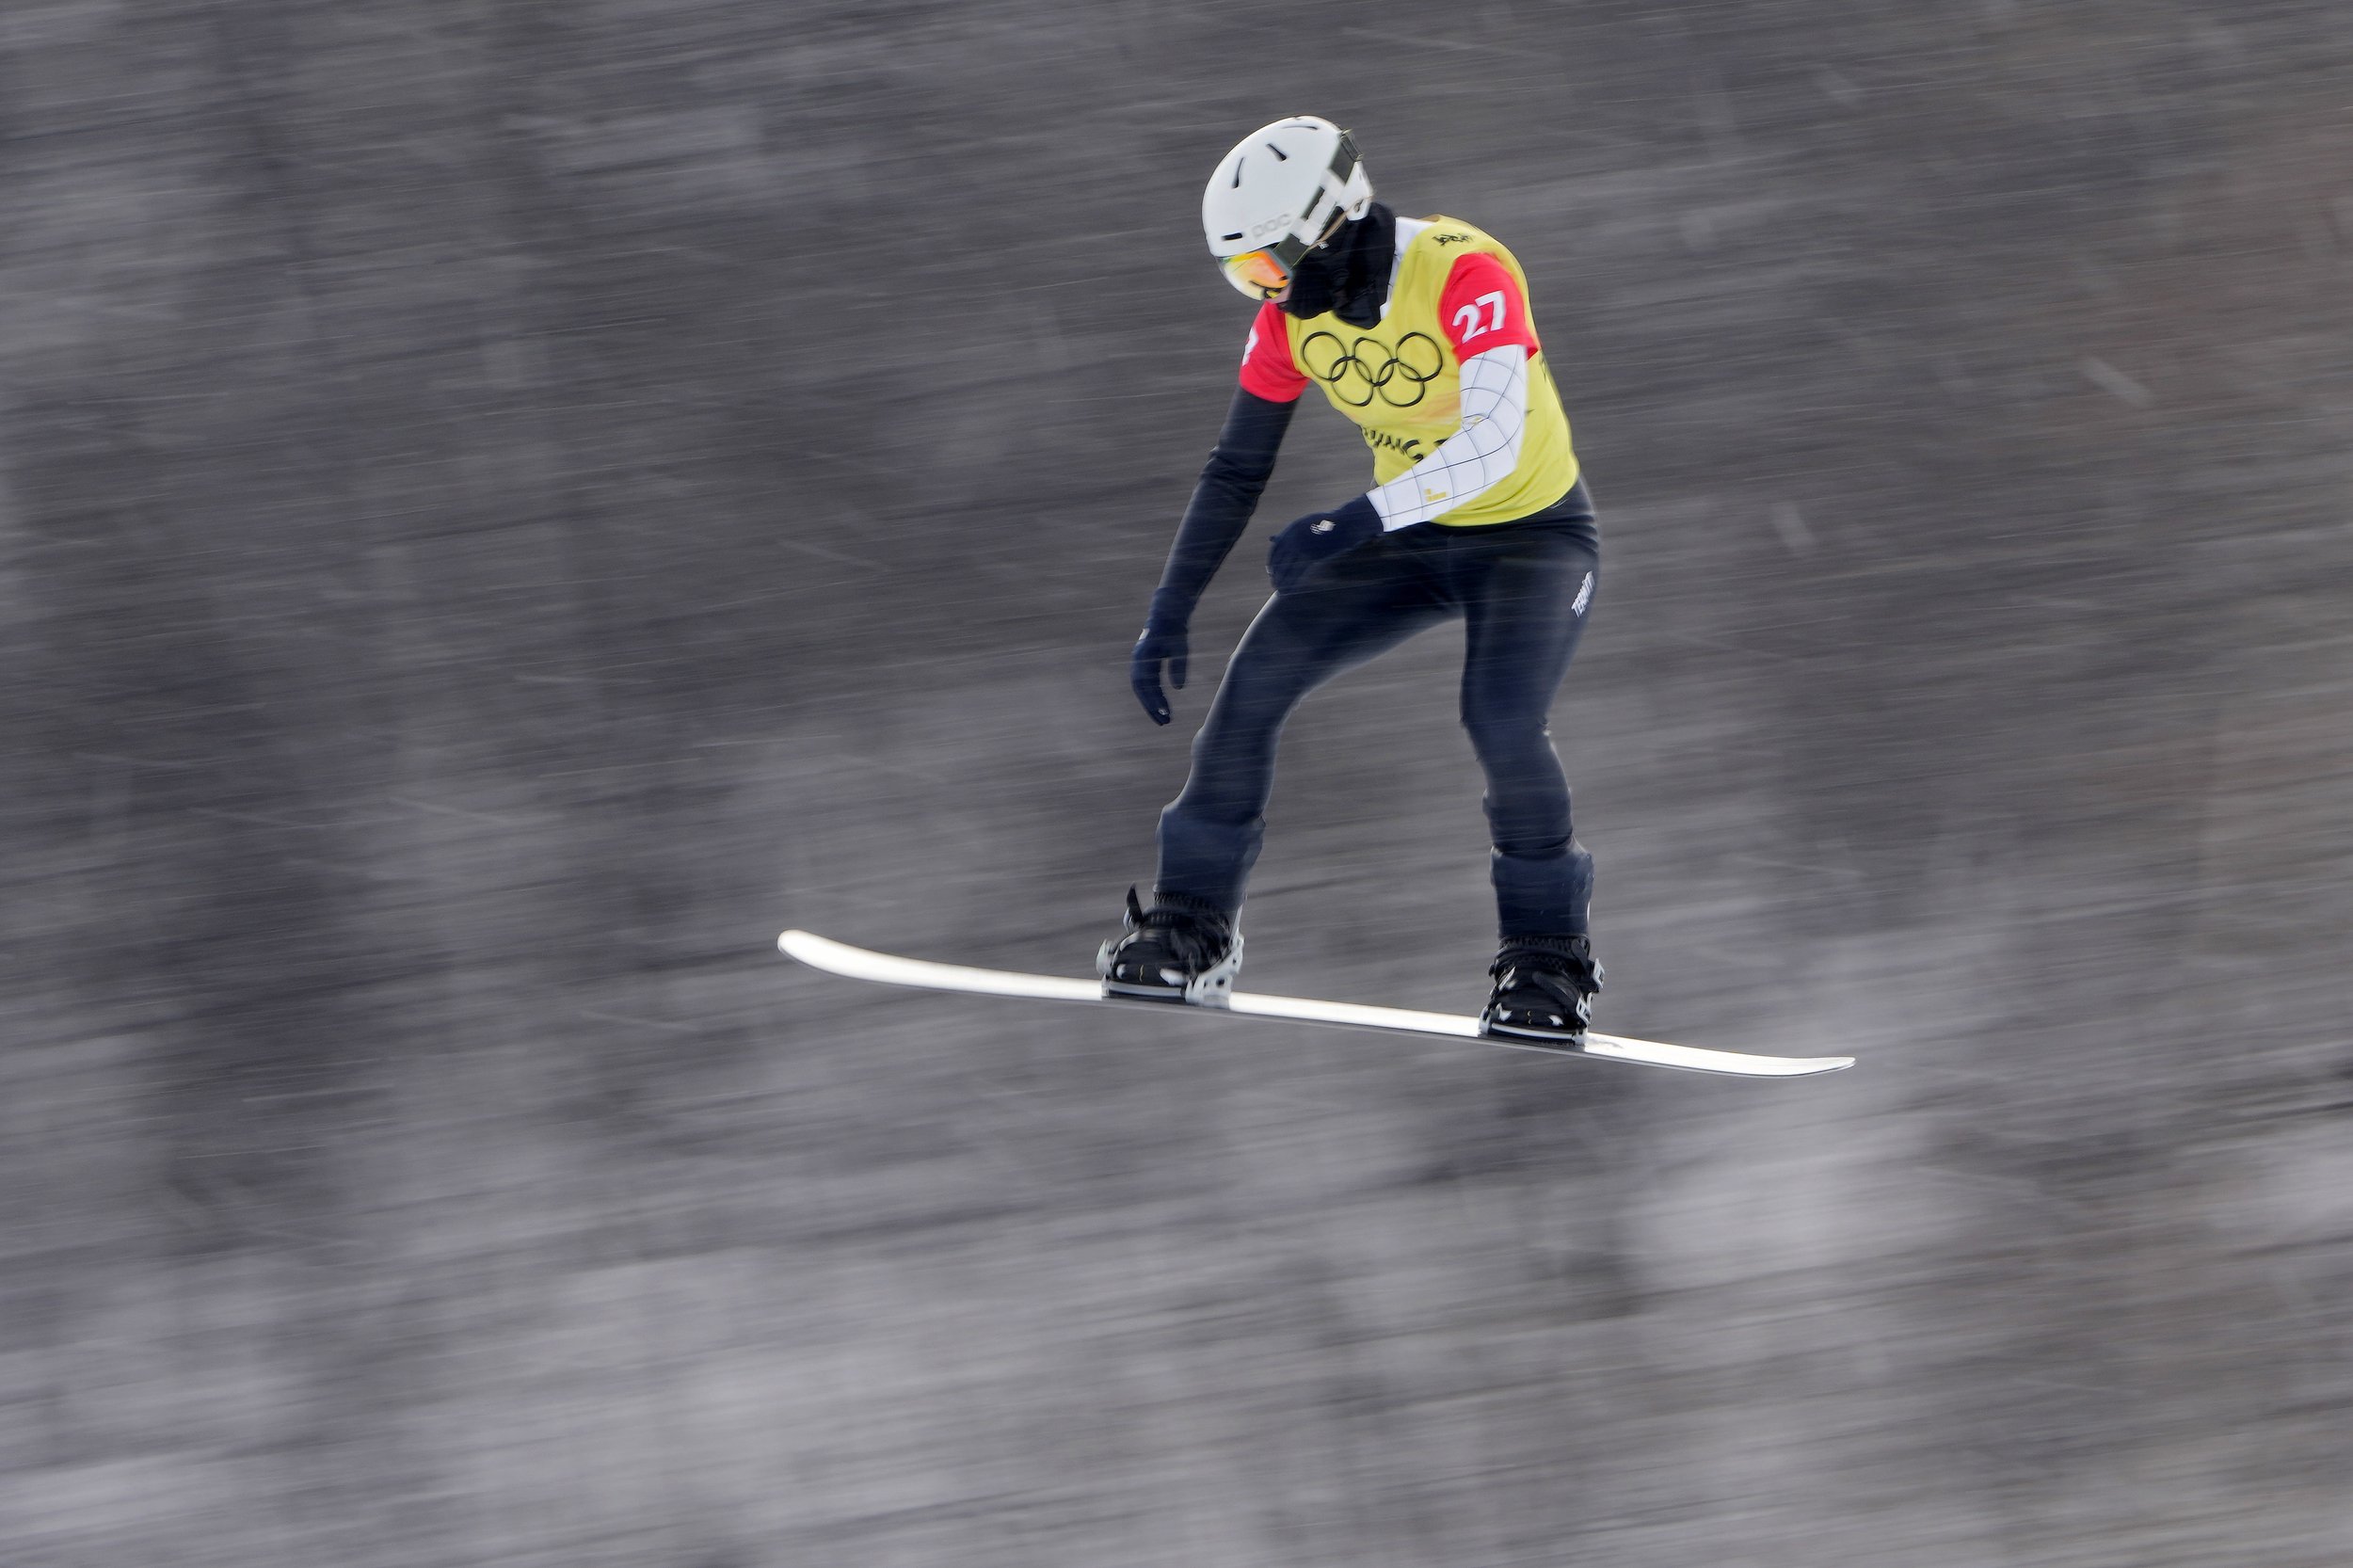  Ekaterina Lokteva-Zagorskaia, of the Russian Olympic Committee, competes during the women's snowboard cross finals at the 2022 Winter Olympics, Wednesday, Feb. 9, 2022, in Zhangjiakou, China. (AP Photo/Aaron Favila) 